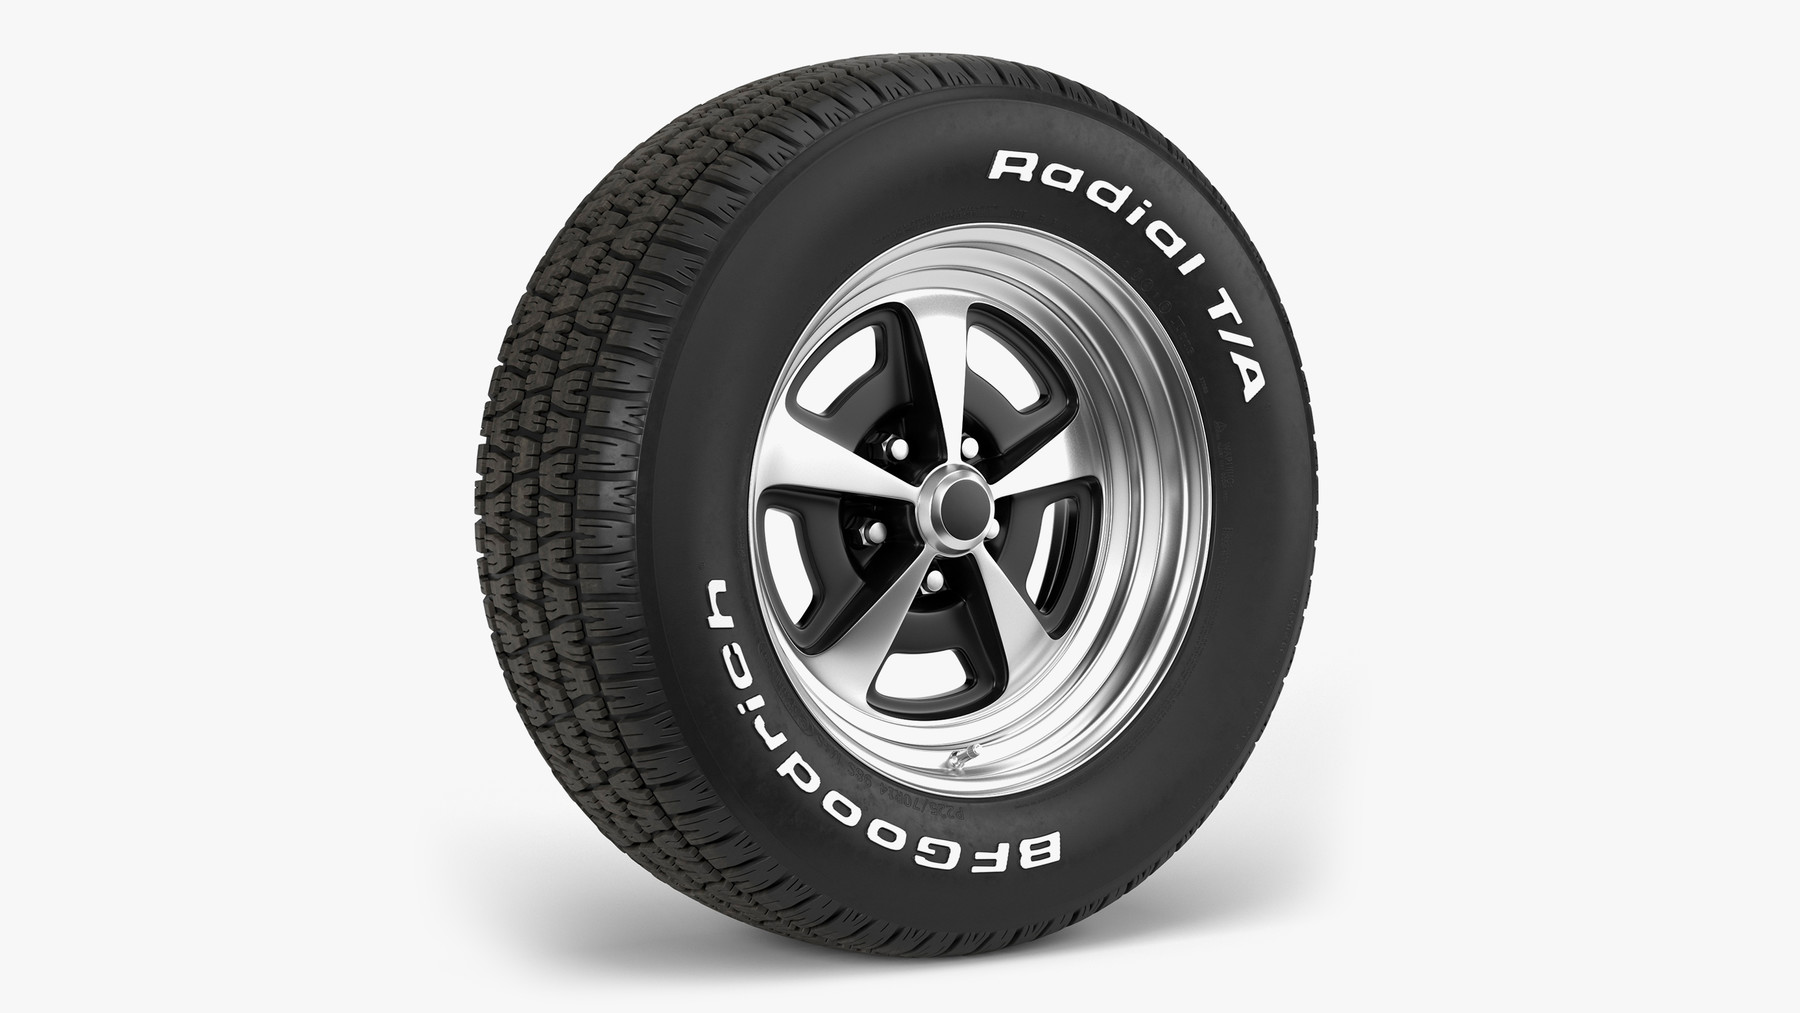 BFGoodrich Radial T/A Tire Magnum 500 Wheel (15 x 7-inch) Highly detailed m...